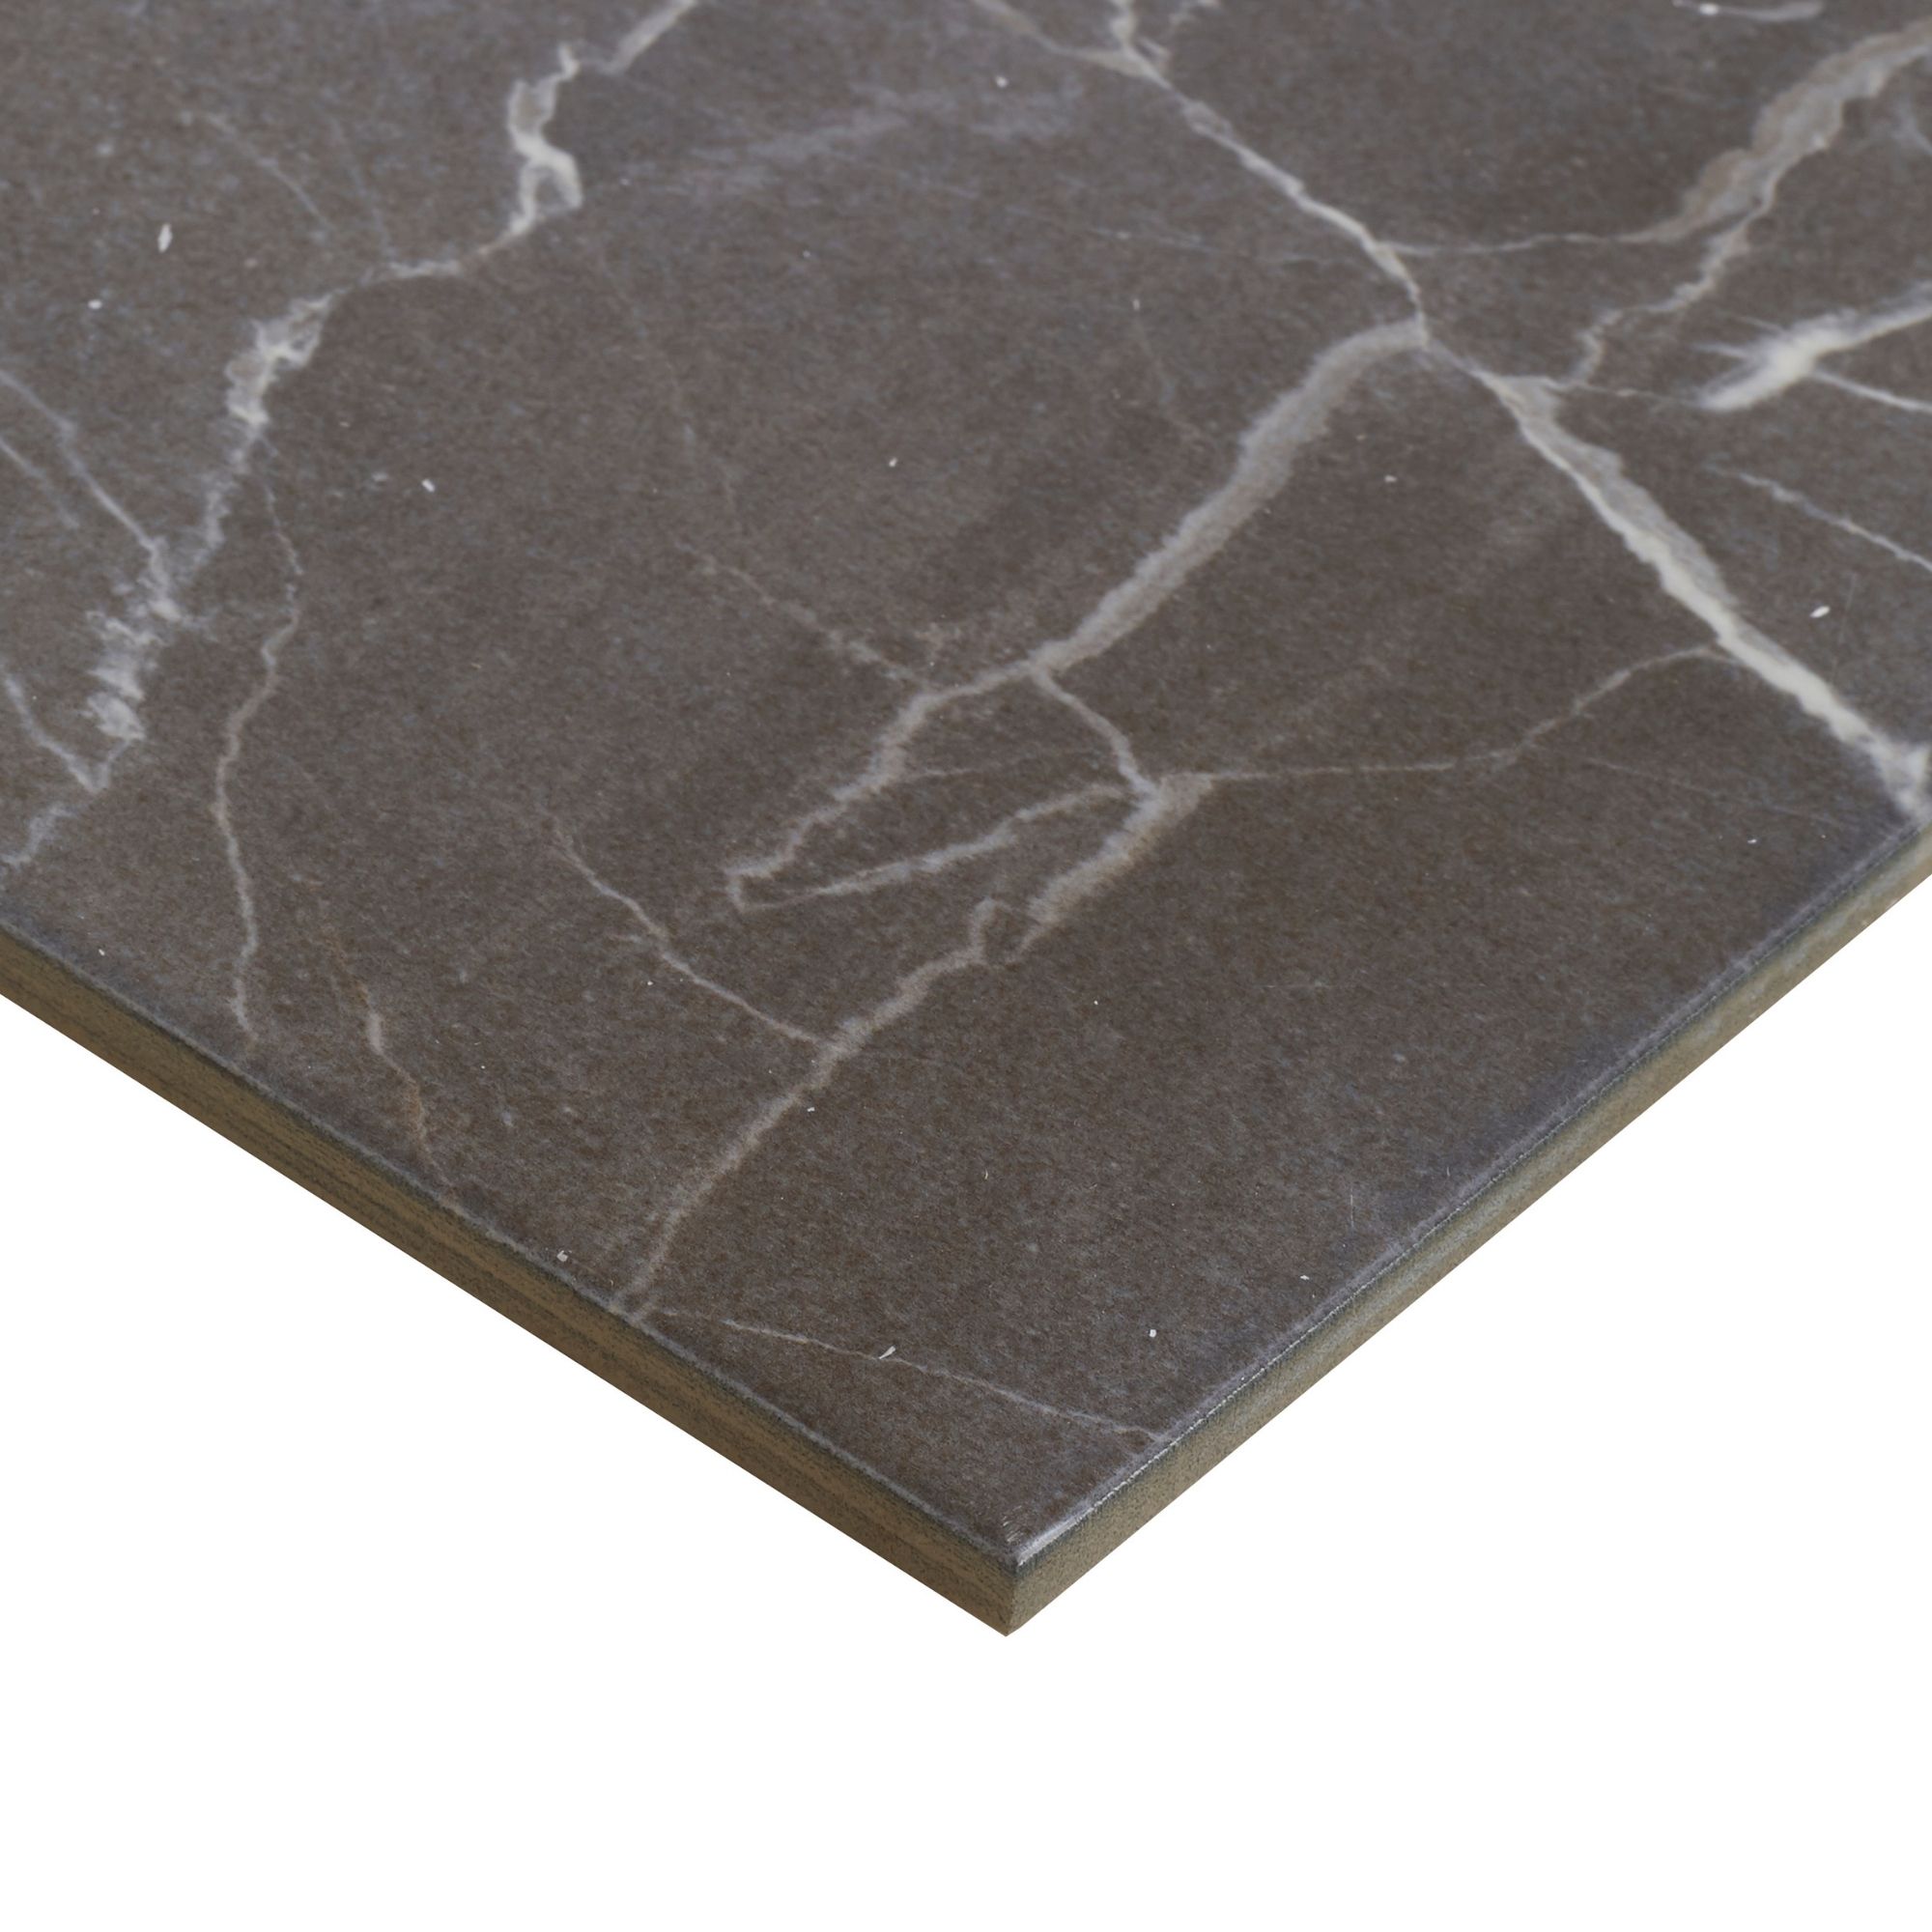 Elegance Silver Gloss Marble effect Ceramic Wall & floor Tile, Pack of 7, (L)600mm (W)300mm